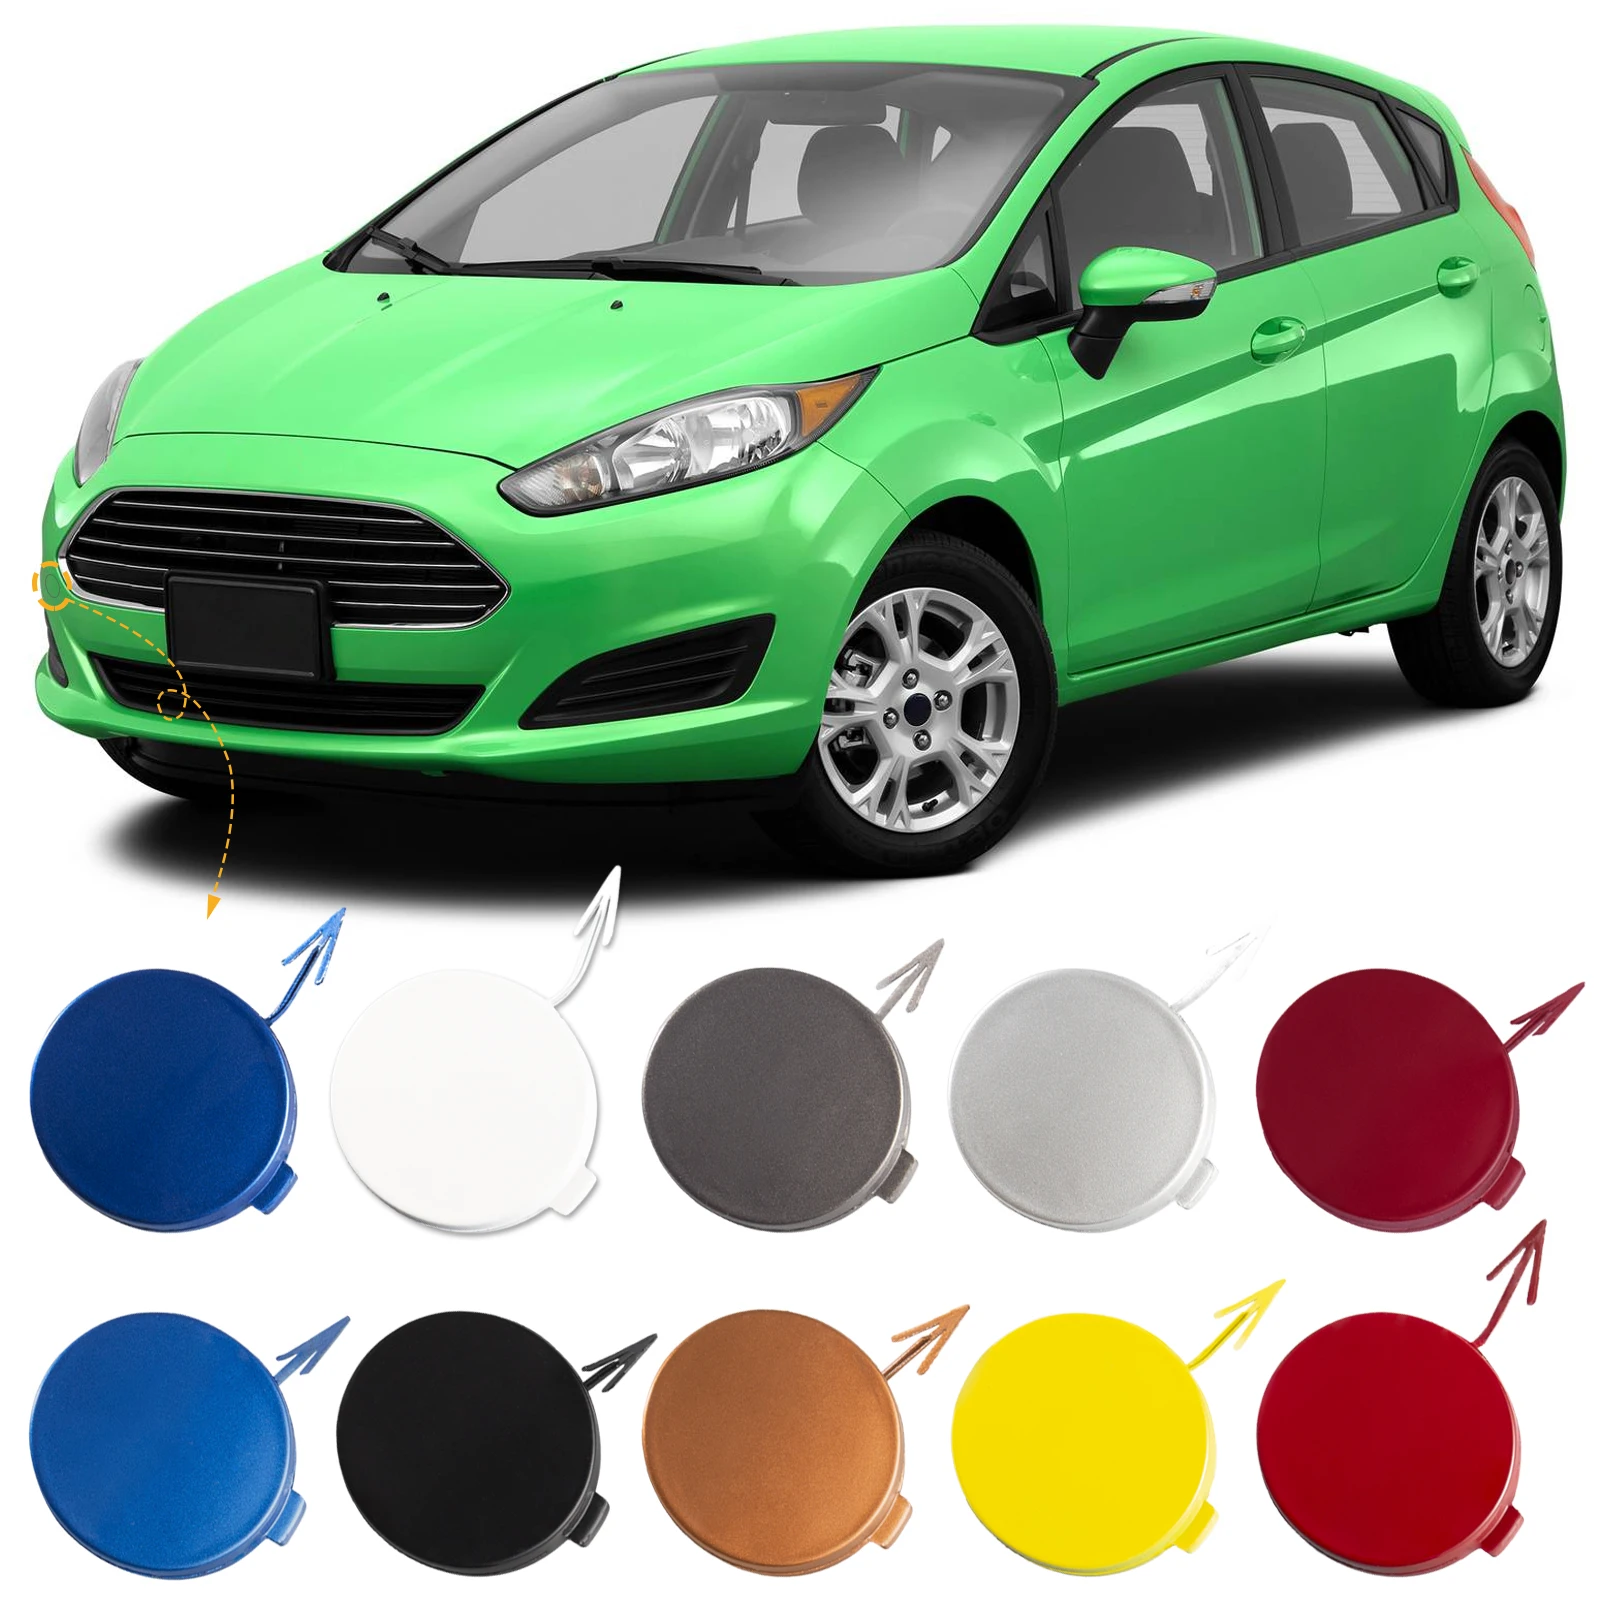 Cafoucs Front Bumper Towing Hook Cover Case For Ford Fiesta MK7 Hatchback  2009 2010 2011 2012 - AliExpress